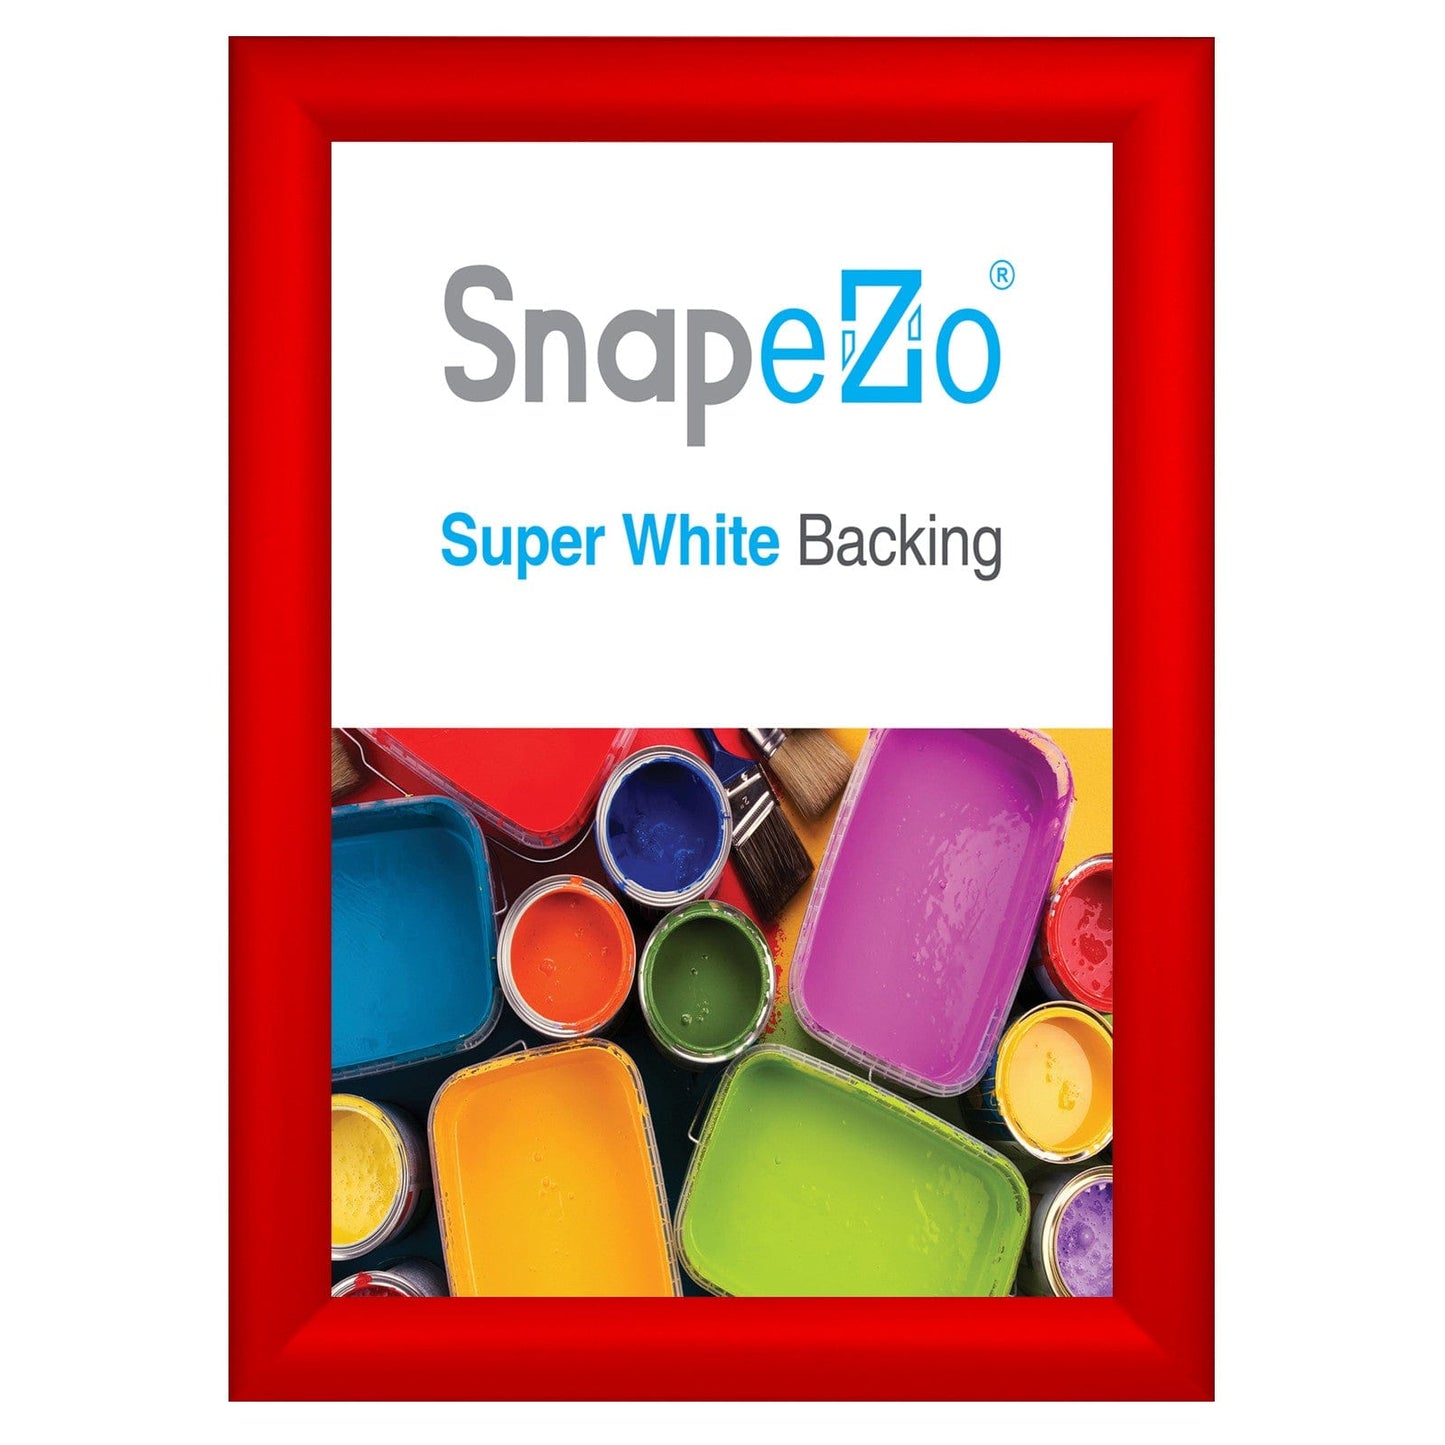 10x13 Red SnapeZo® Snap Frame - 1.2" Profile - Snap Frames Direct